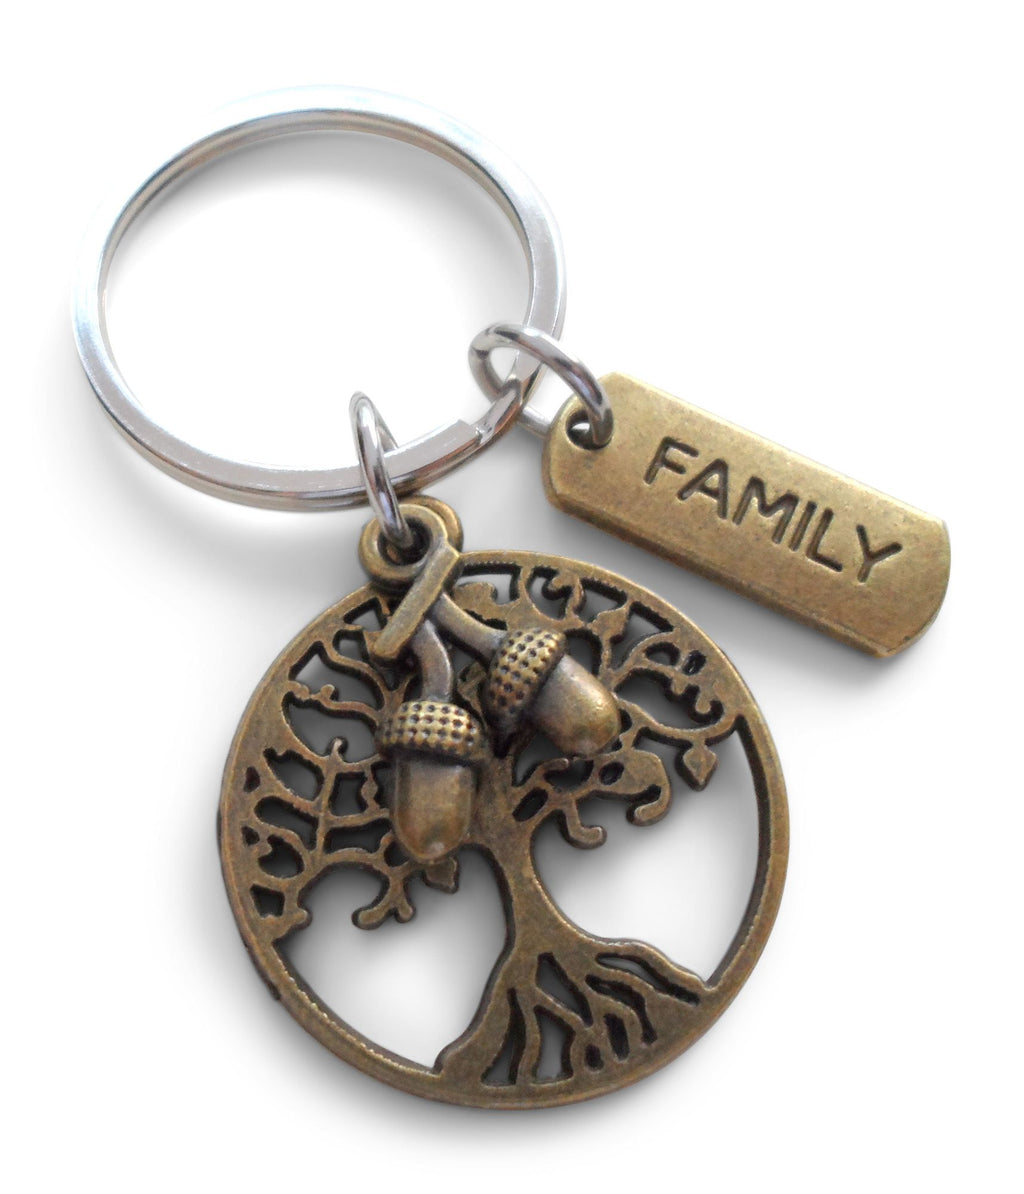 Bronze Family Tree Charm Keychain with Acorn Seeds Charm, Family Reunion Gift -Our Roots Remain as One